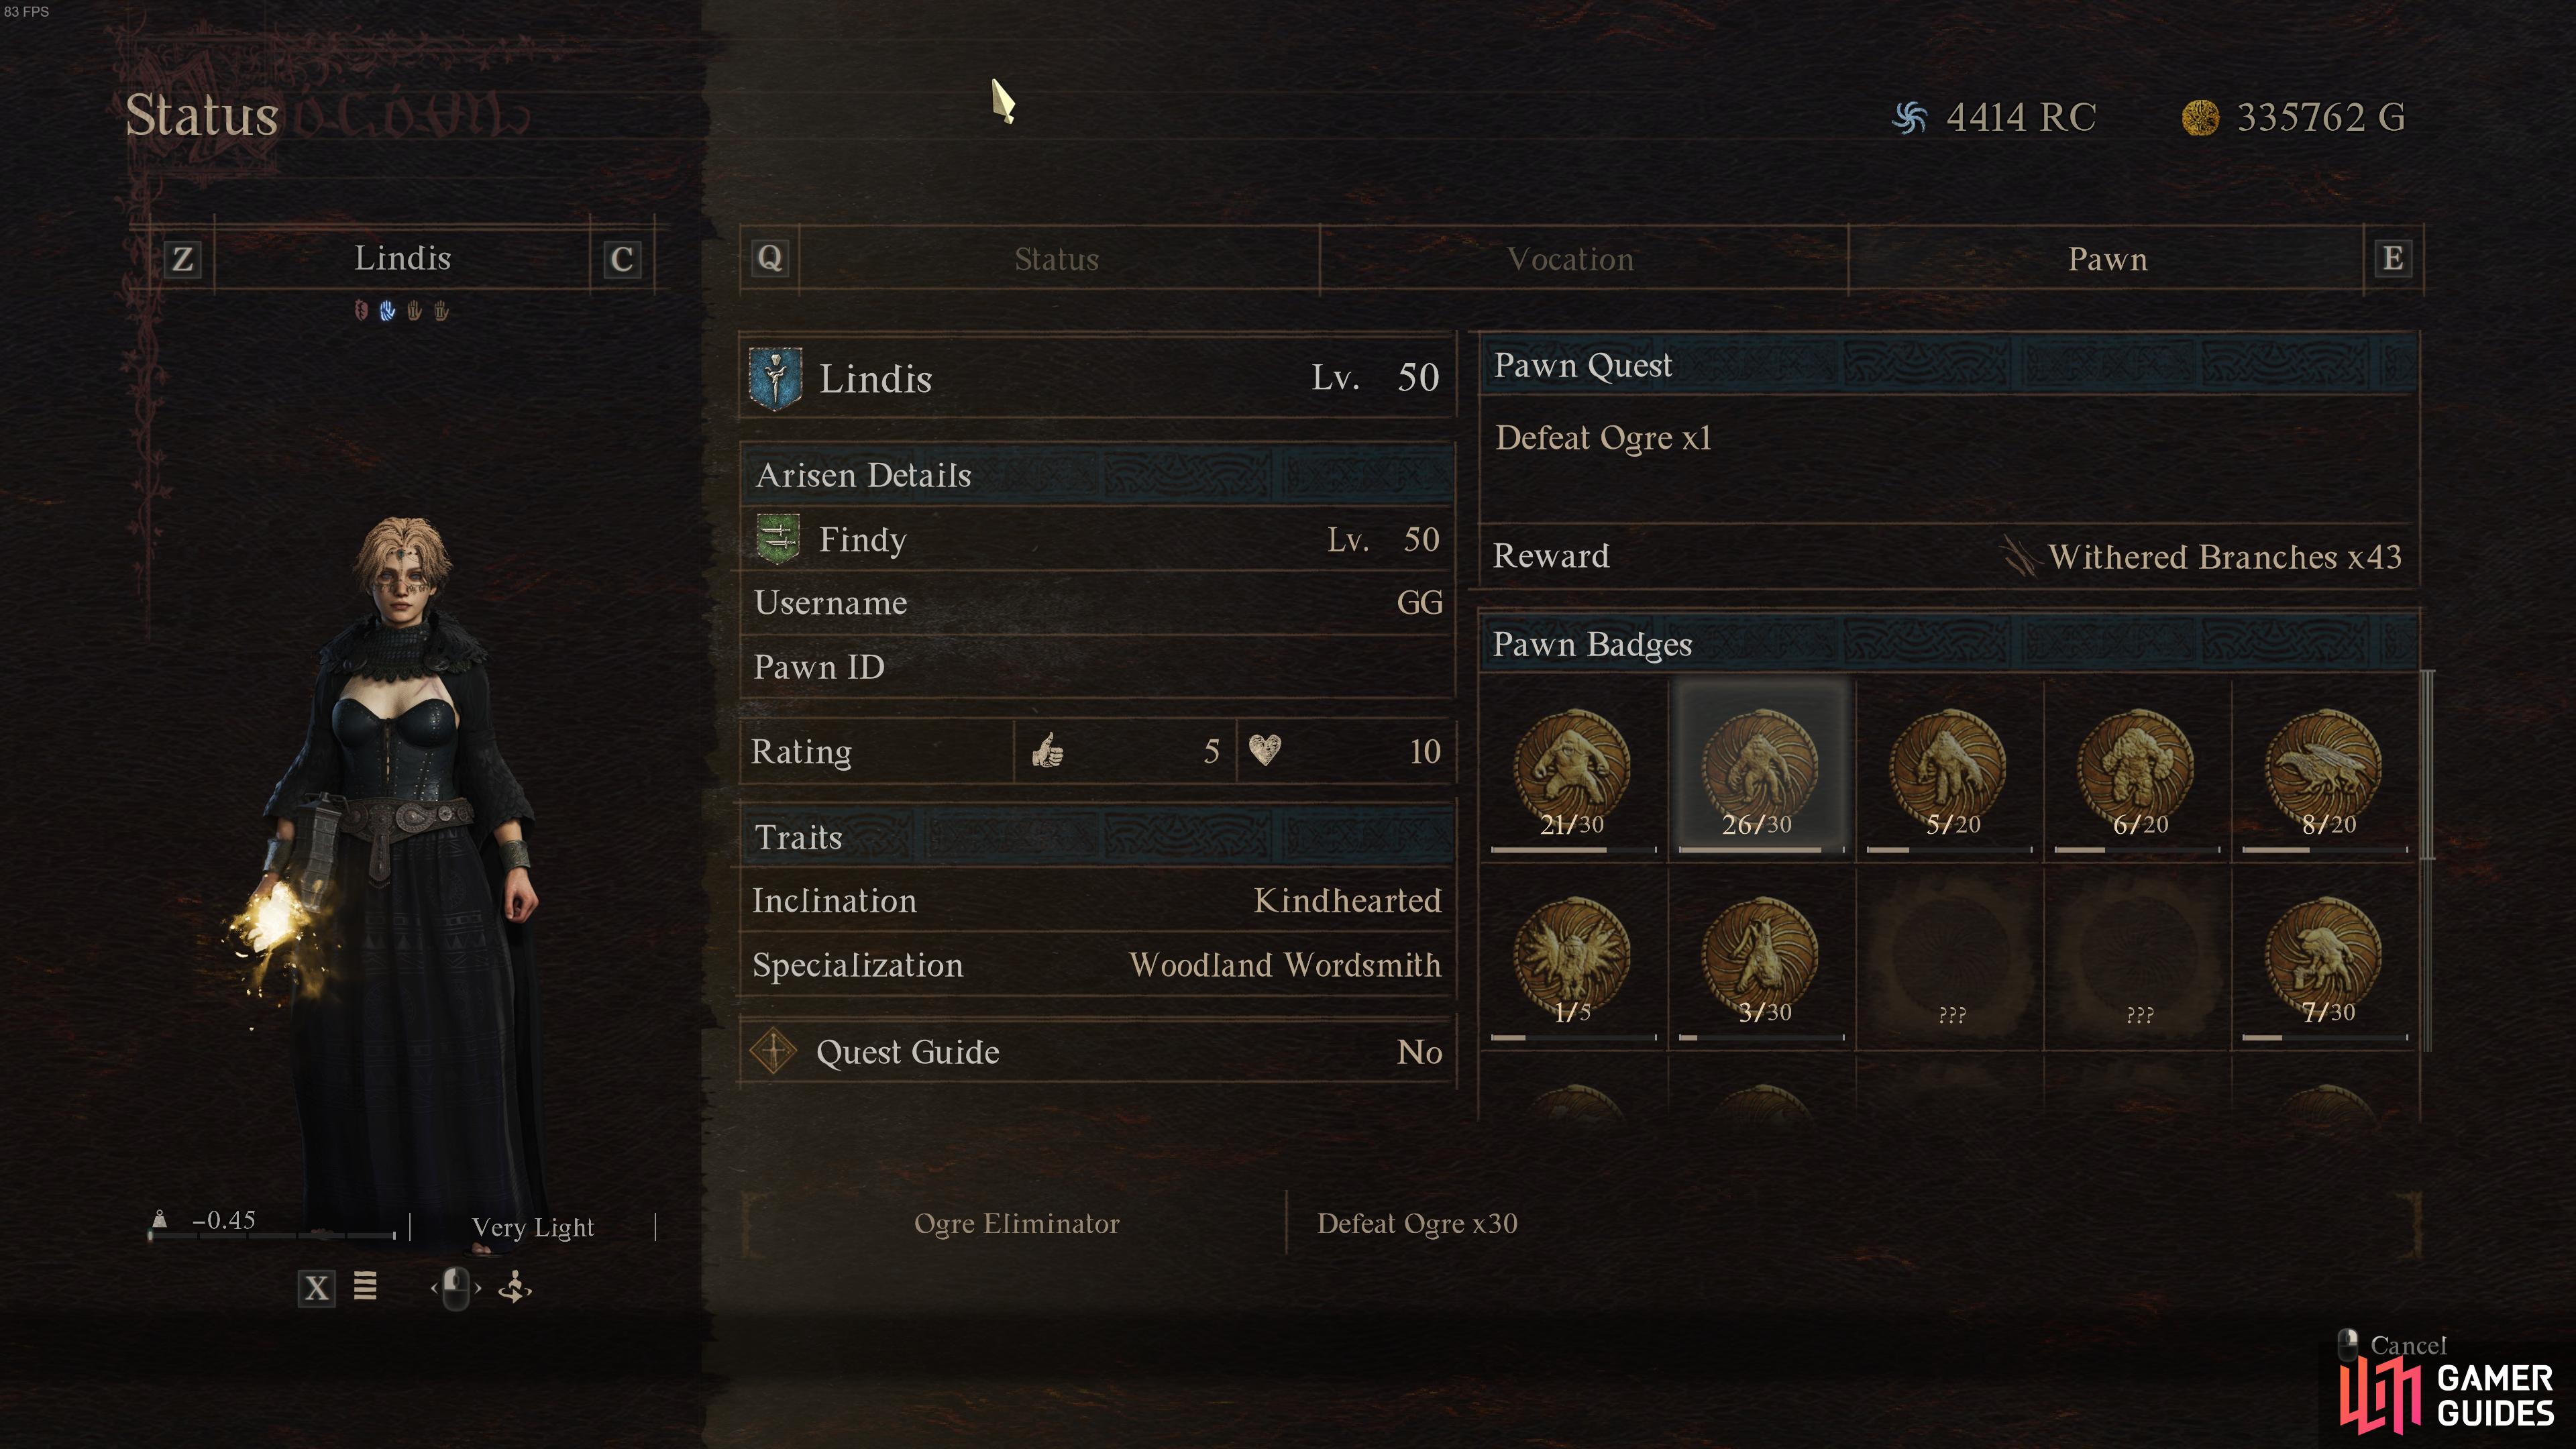 You can check your pawn’s status sheet to see the progress of their badges.